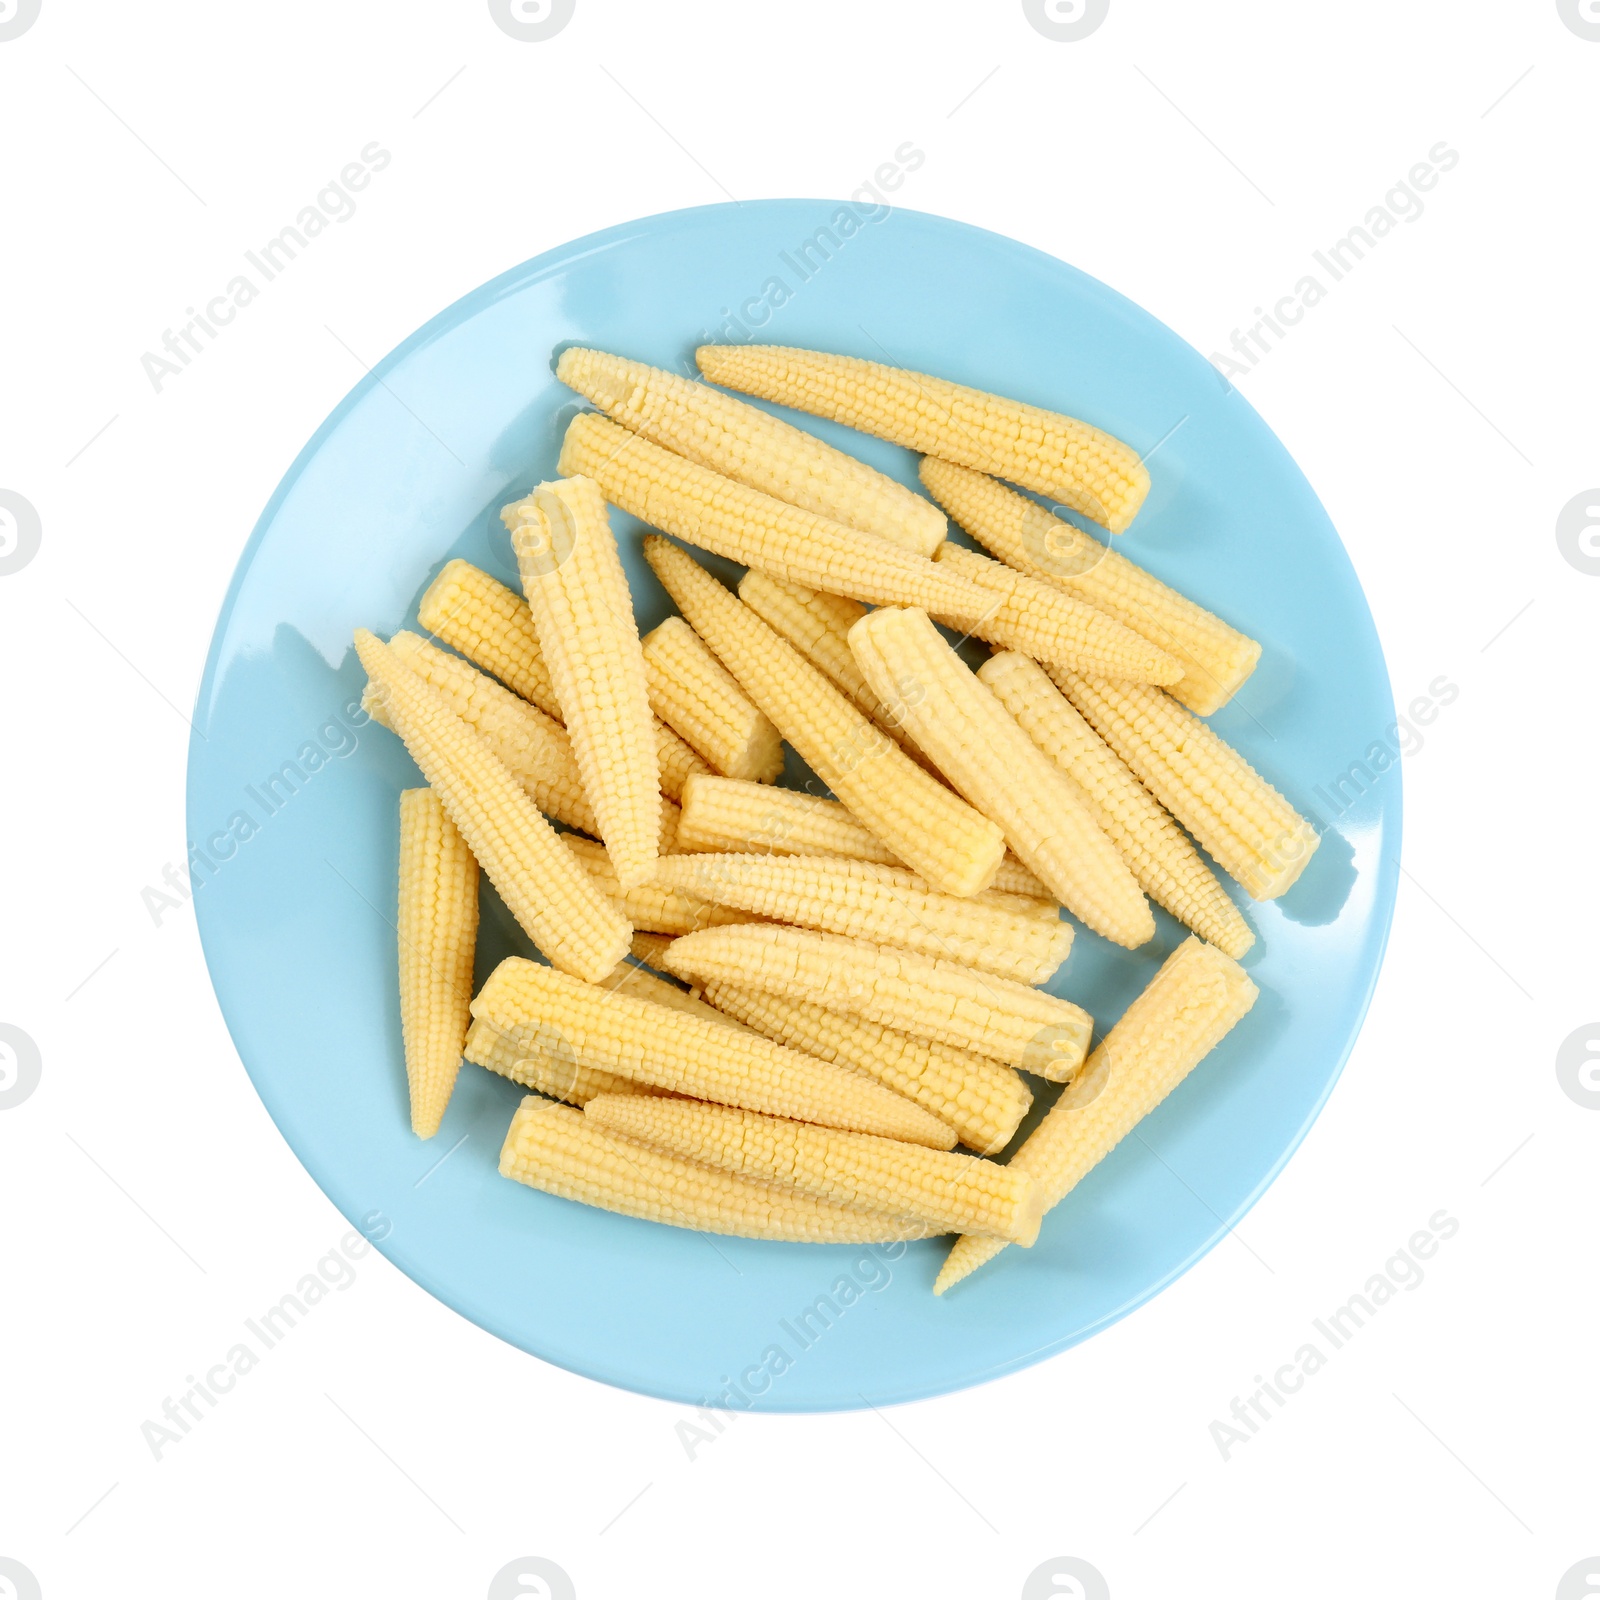 Photo of Fresh baby corn cobs on white background, top view